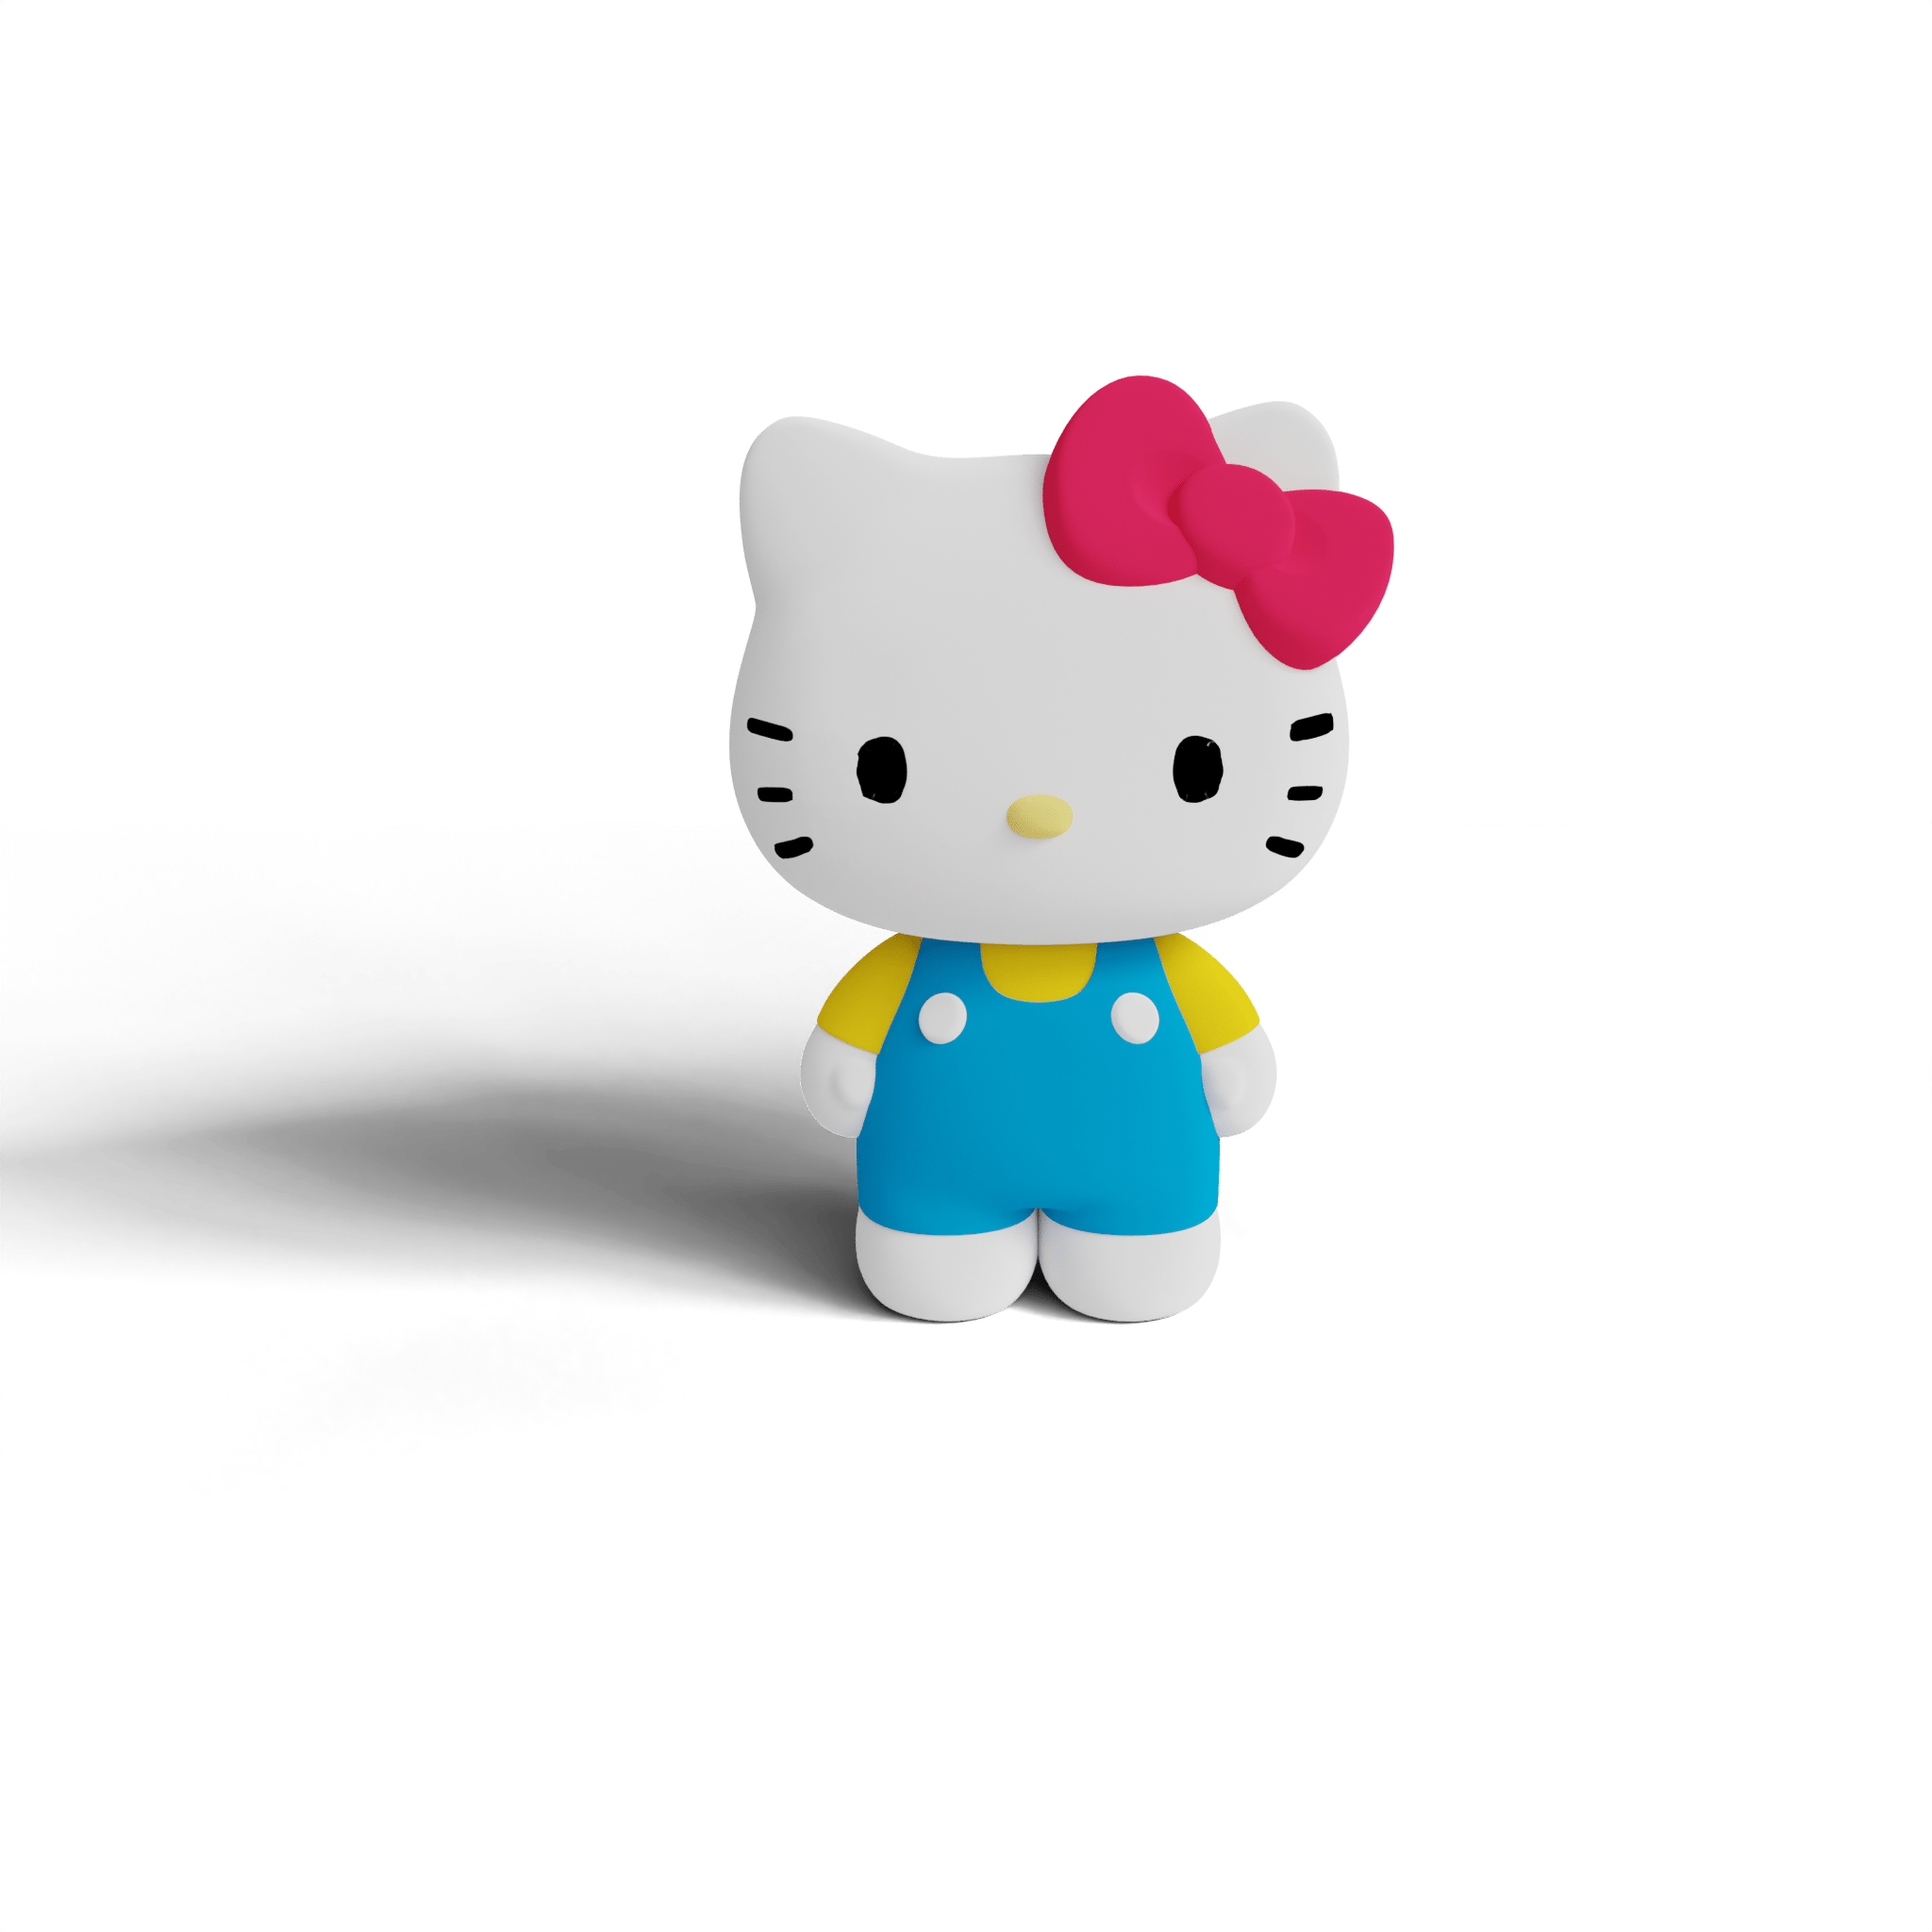 HELLO KITTY AND FRIENDS HAPPINESS PARADE for Nintendo Switch